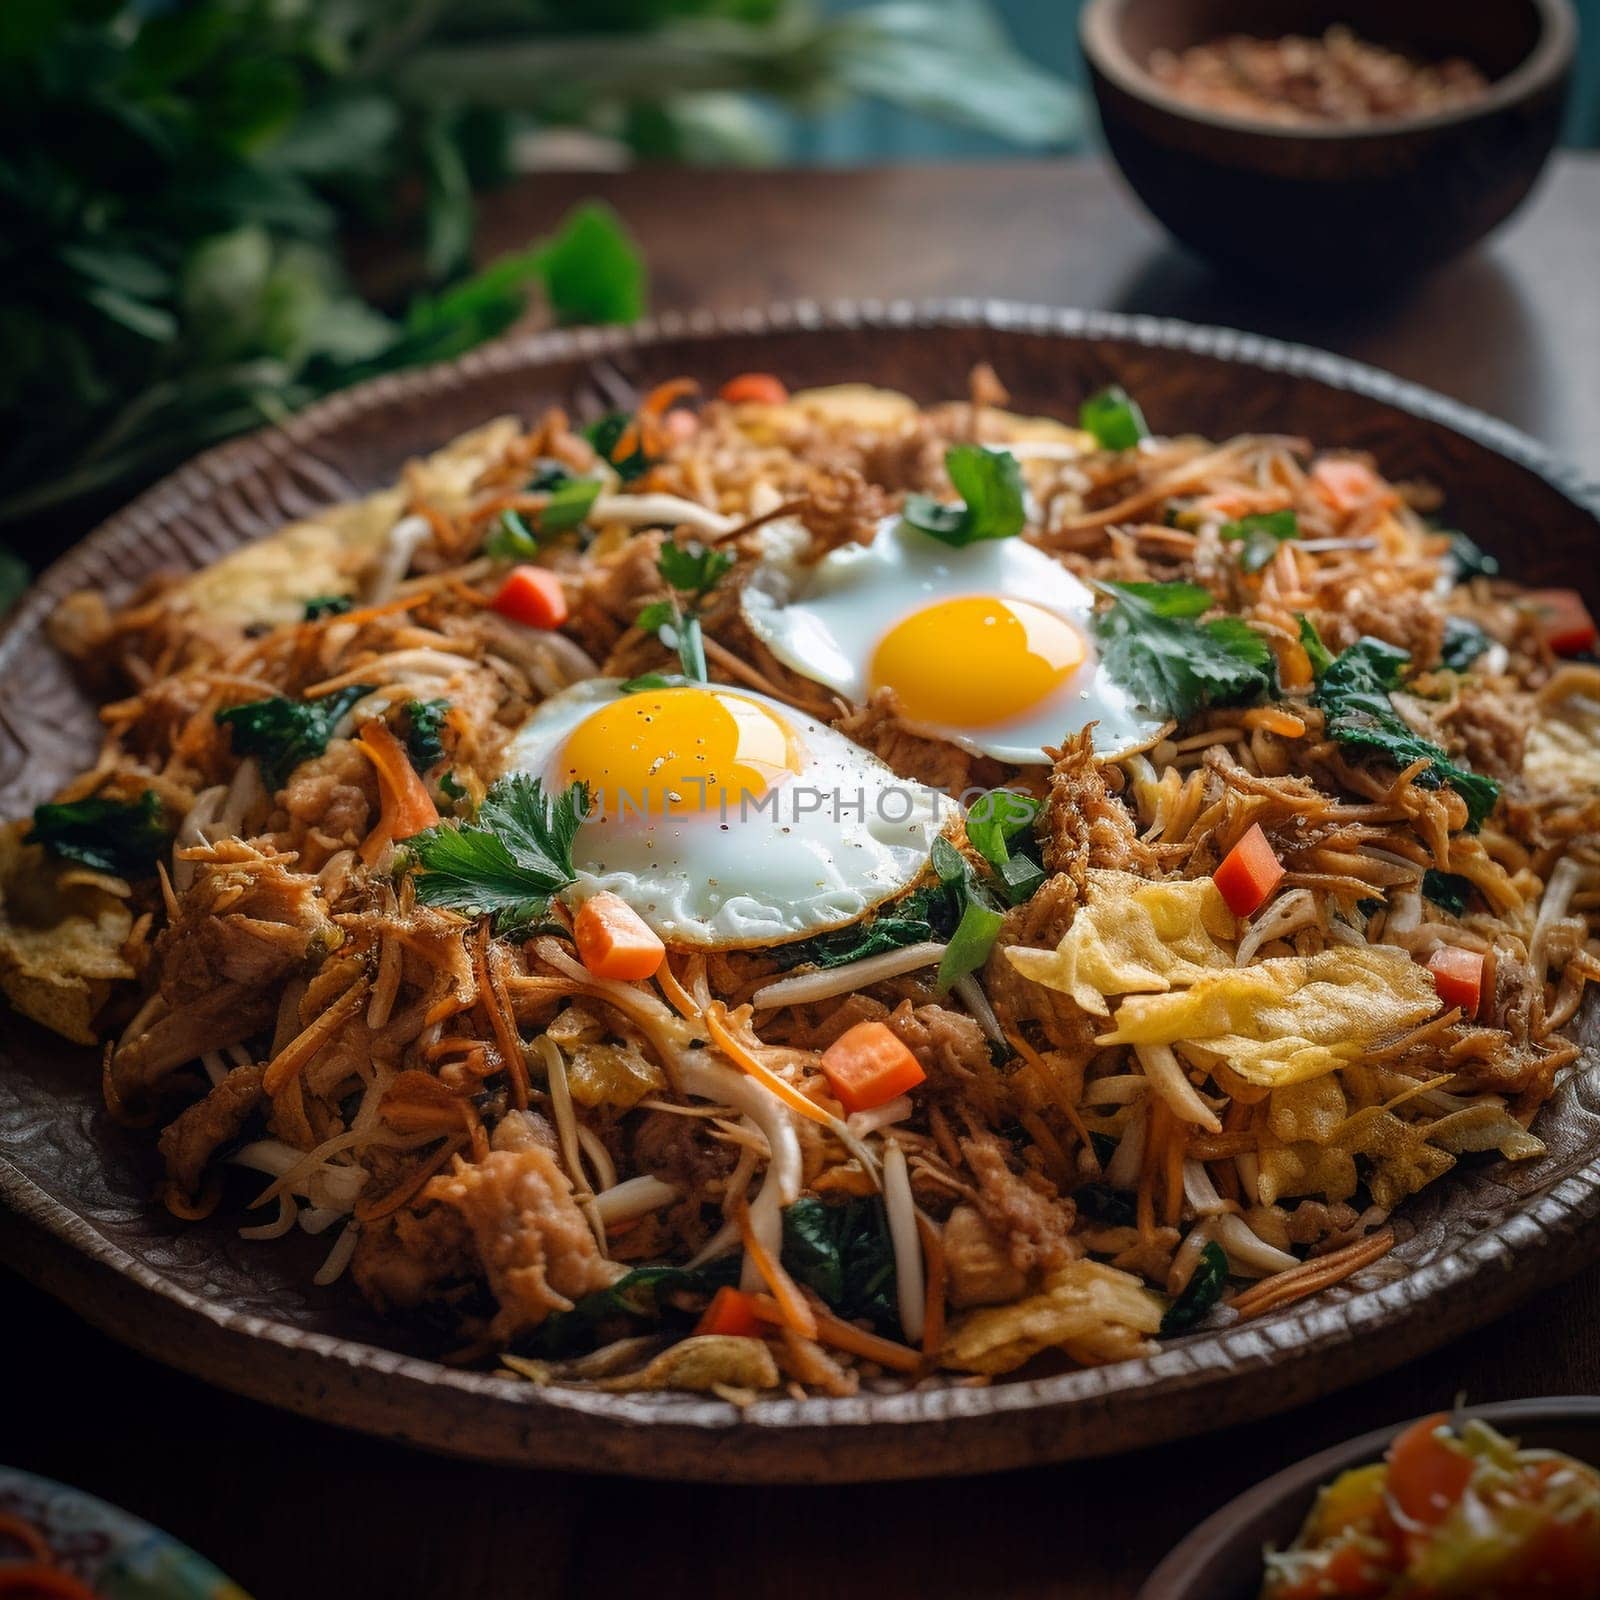 Sri Lankan Kottu Roti: Dynamic and Colorful Flatbread Stir-Fry with Vegetables, Meat, and Spices by Sahin